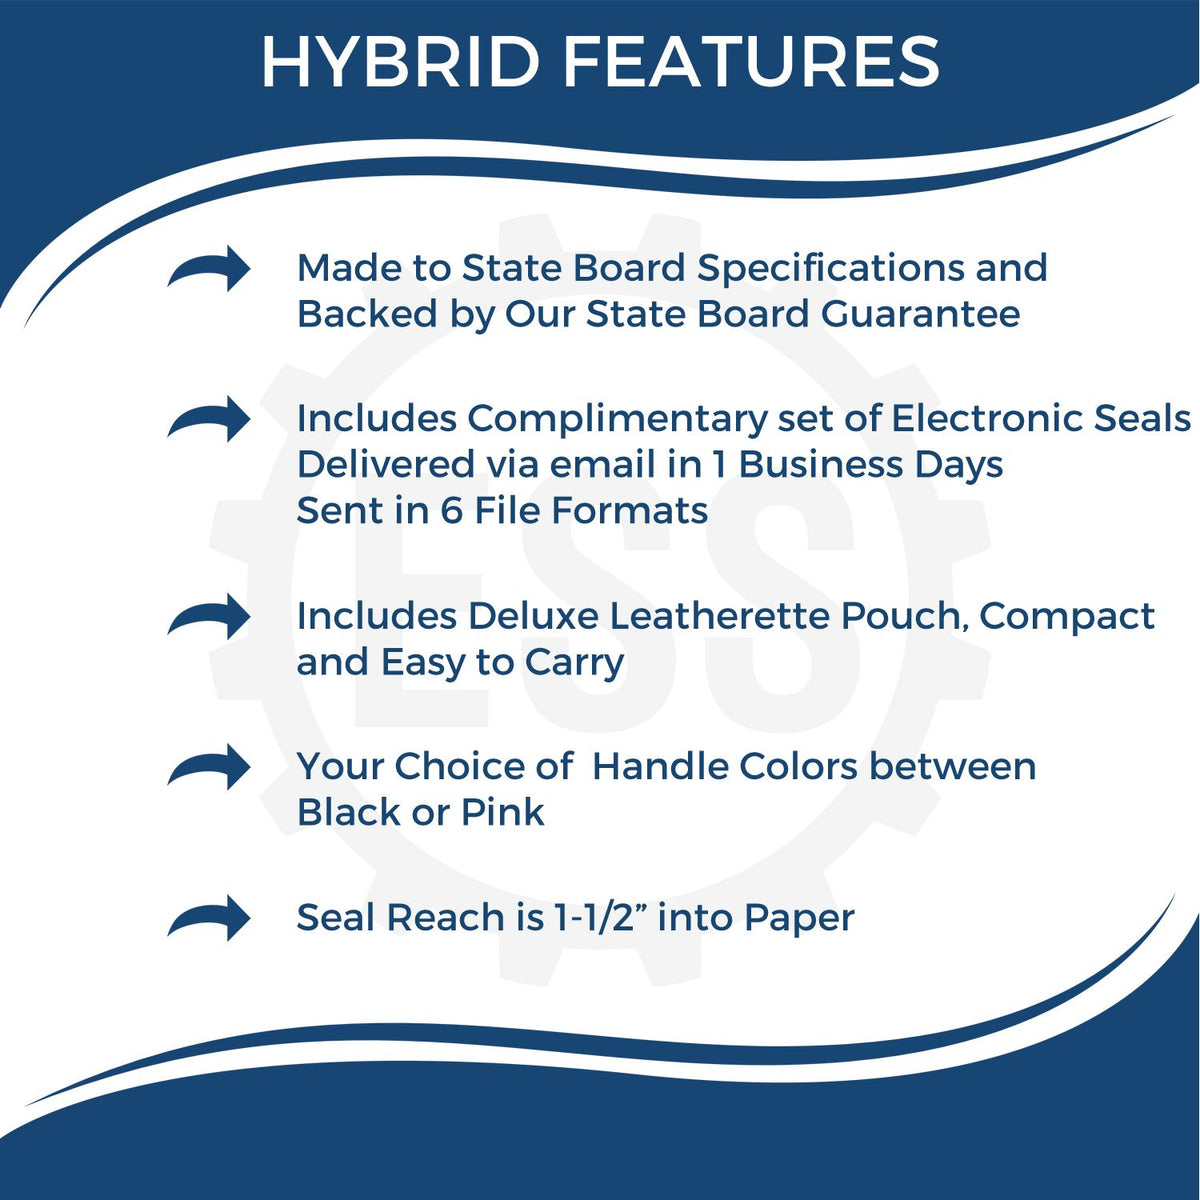 A picture of an infographic highlighting the selling points for the Hybrid Montana Engineer Seal